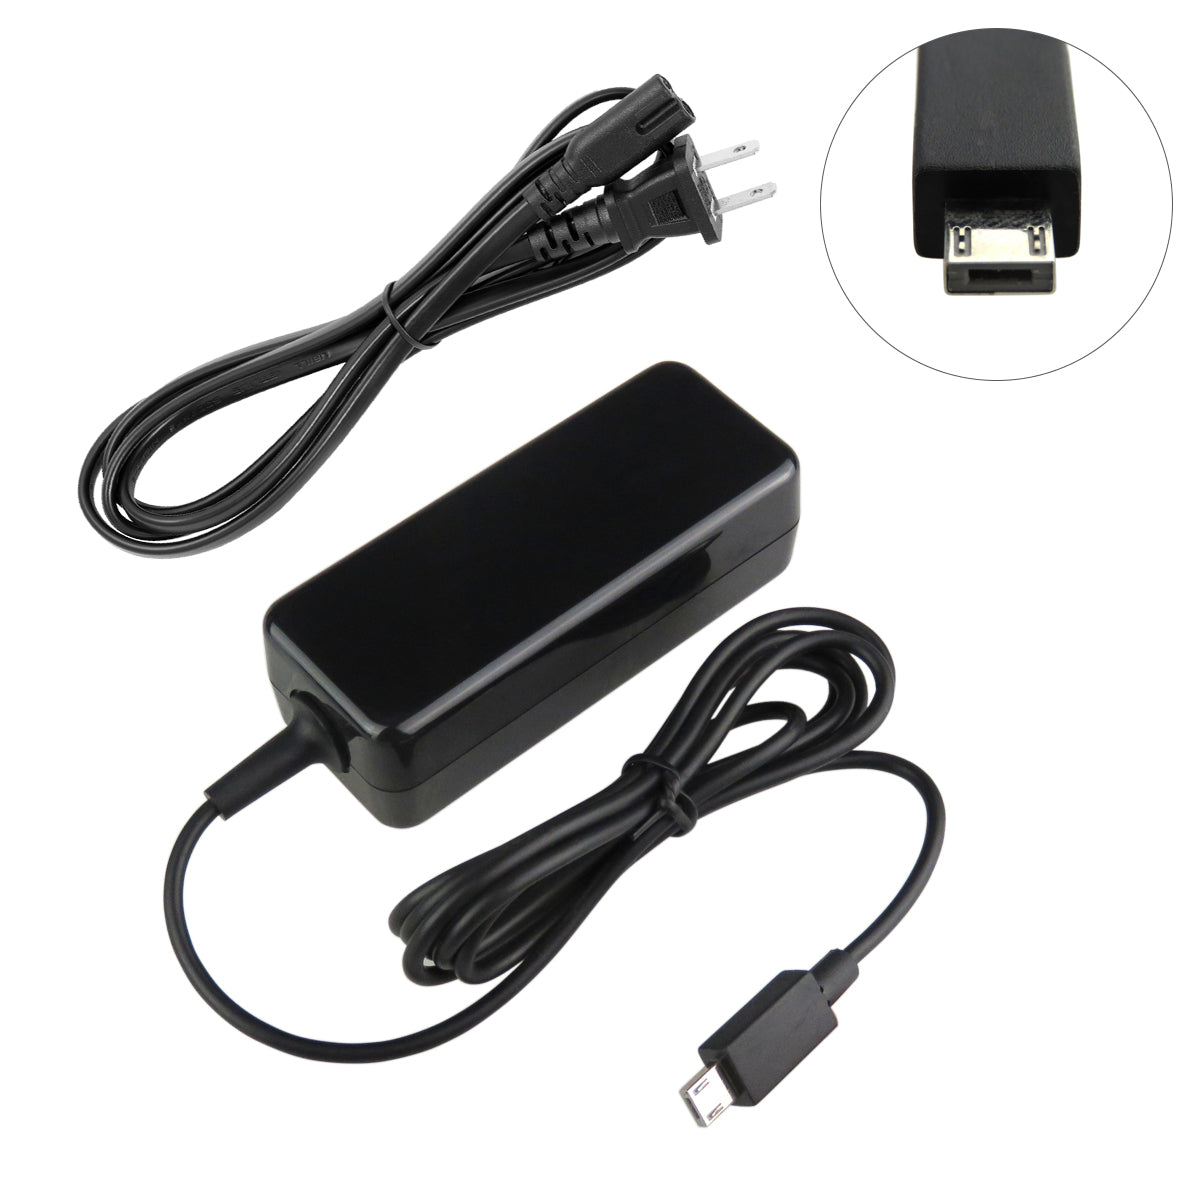 Charger for ASUS VivoBook E200 Laptop.